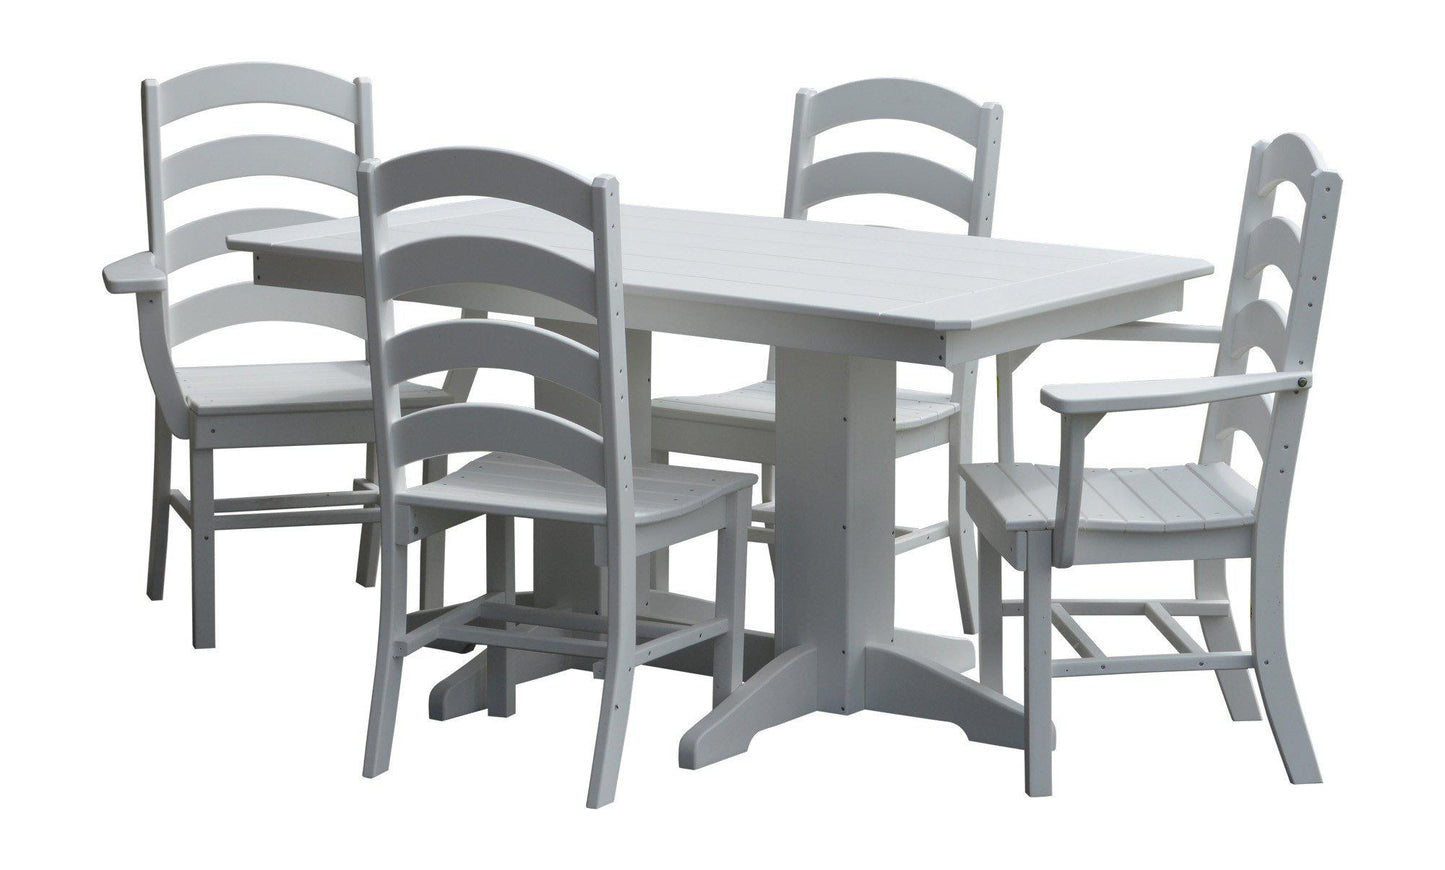 A&L Furniture Recycled Plastic 5ft Dining Table with Ladderback Chairs 5 Piece Set - White